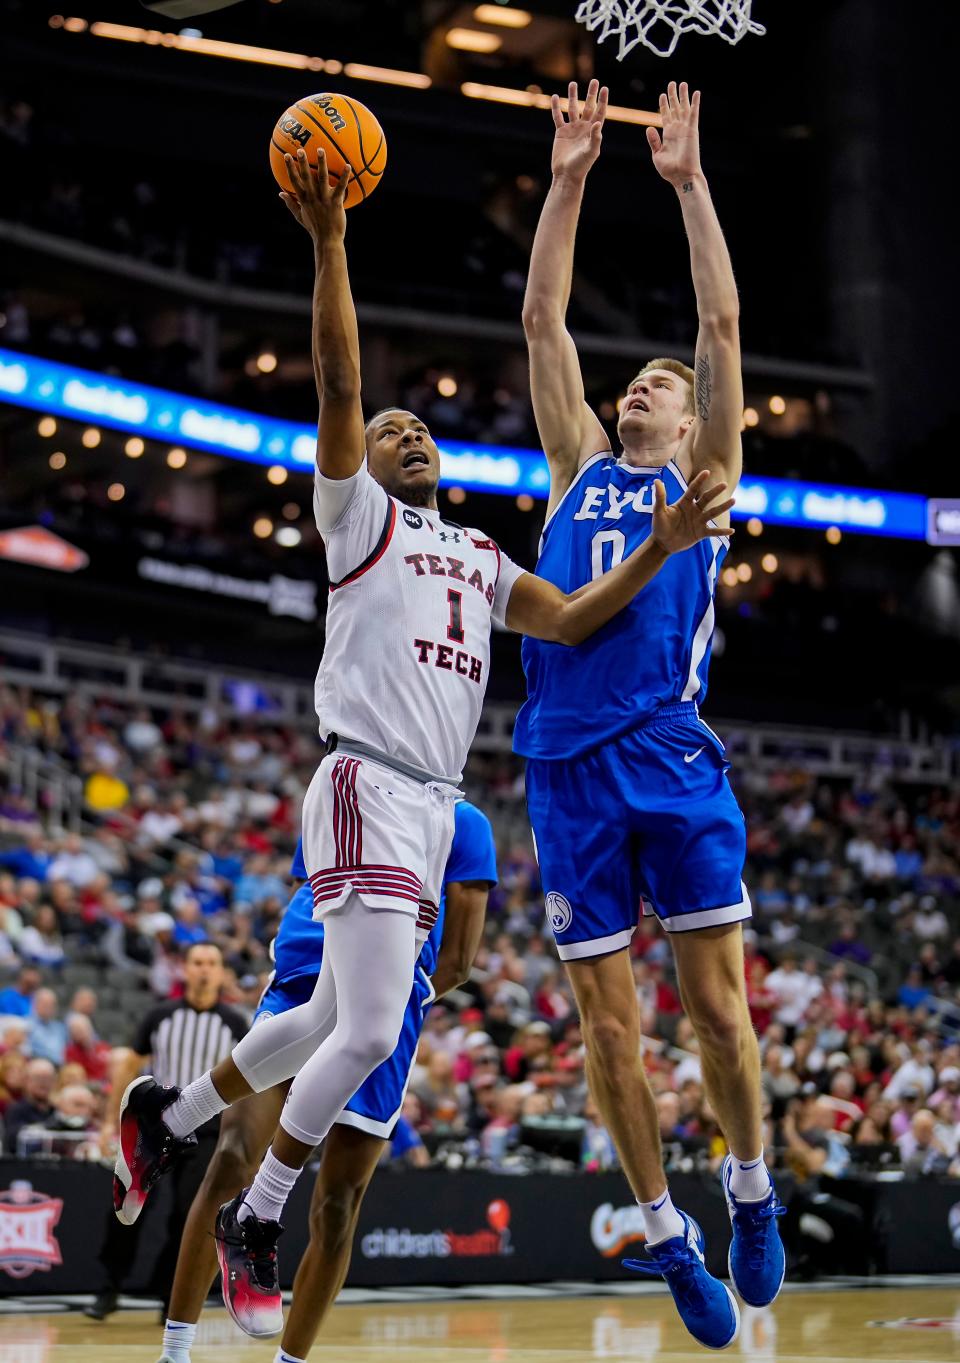 Lamar Washington #1 of Texas Tech shoots against Noah Waterman #0 of BYU during the first half of a quarterfinal game of the Big 12 Men's Basketball Tournament at T-Mobile Center on Thursday, March 14, 2024 in Kansas City, Missouri.